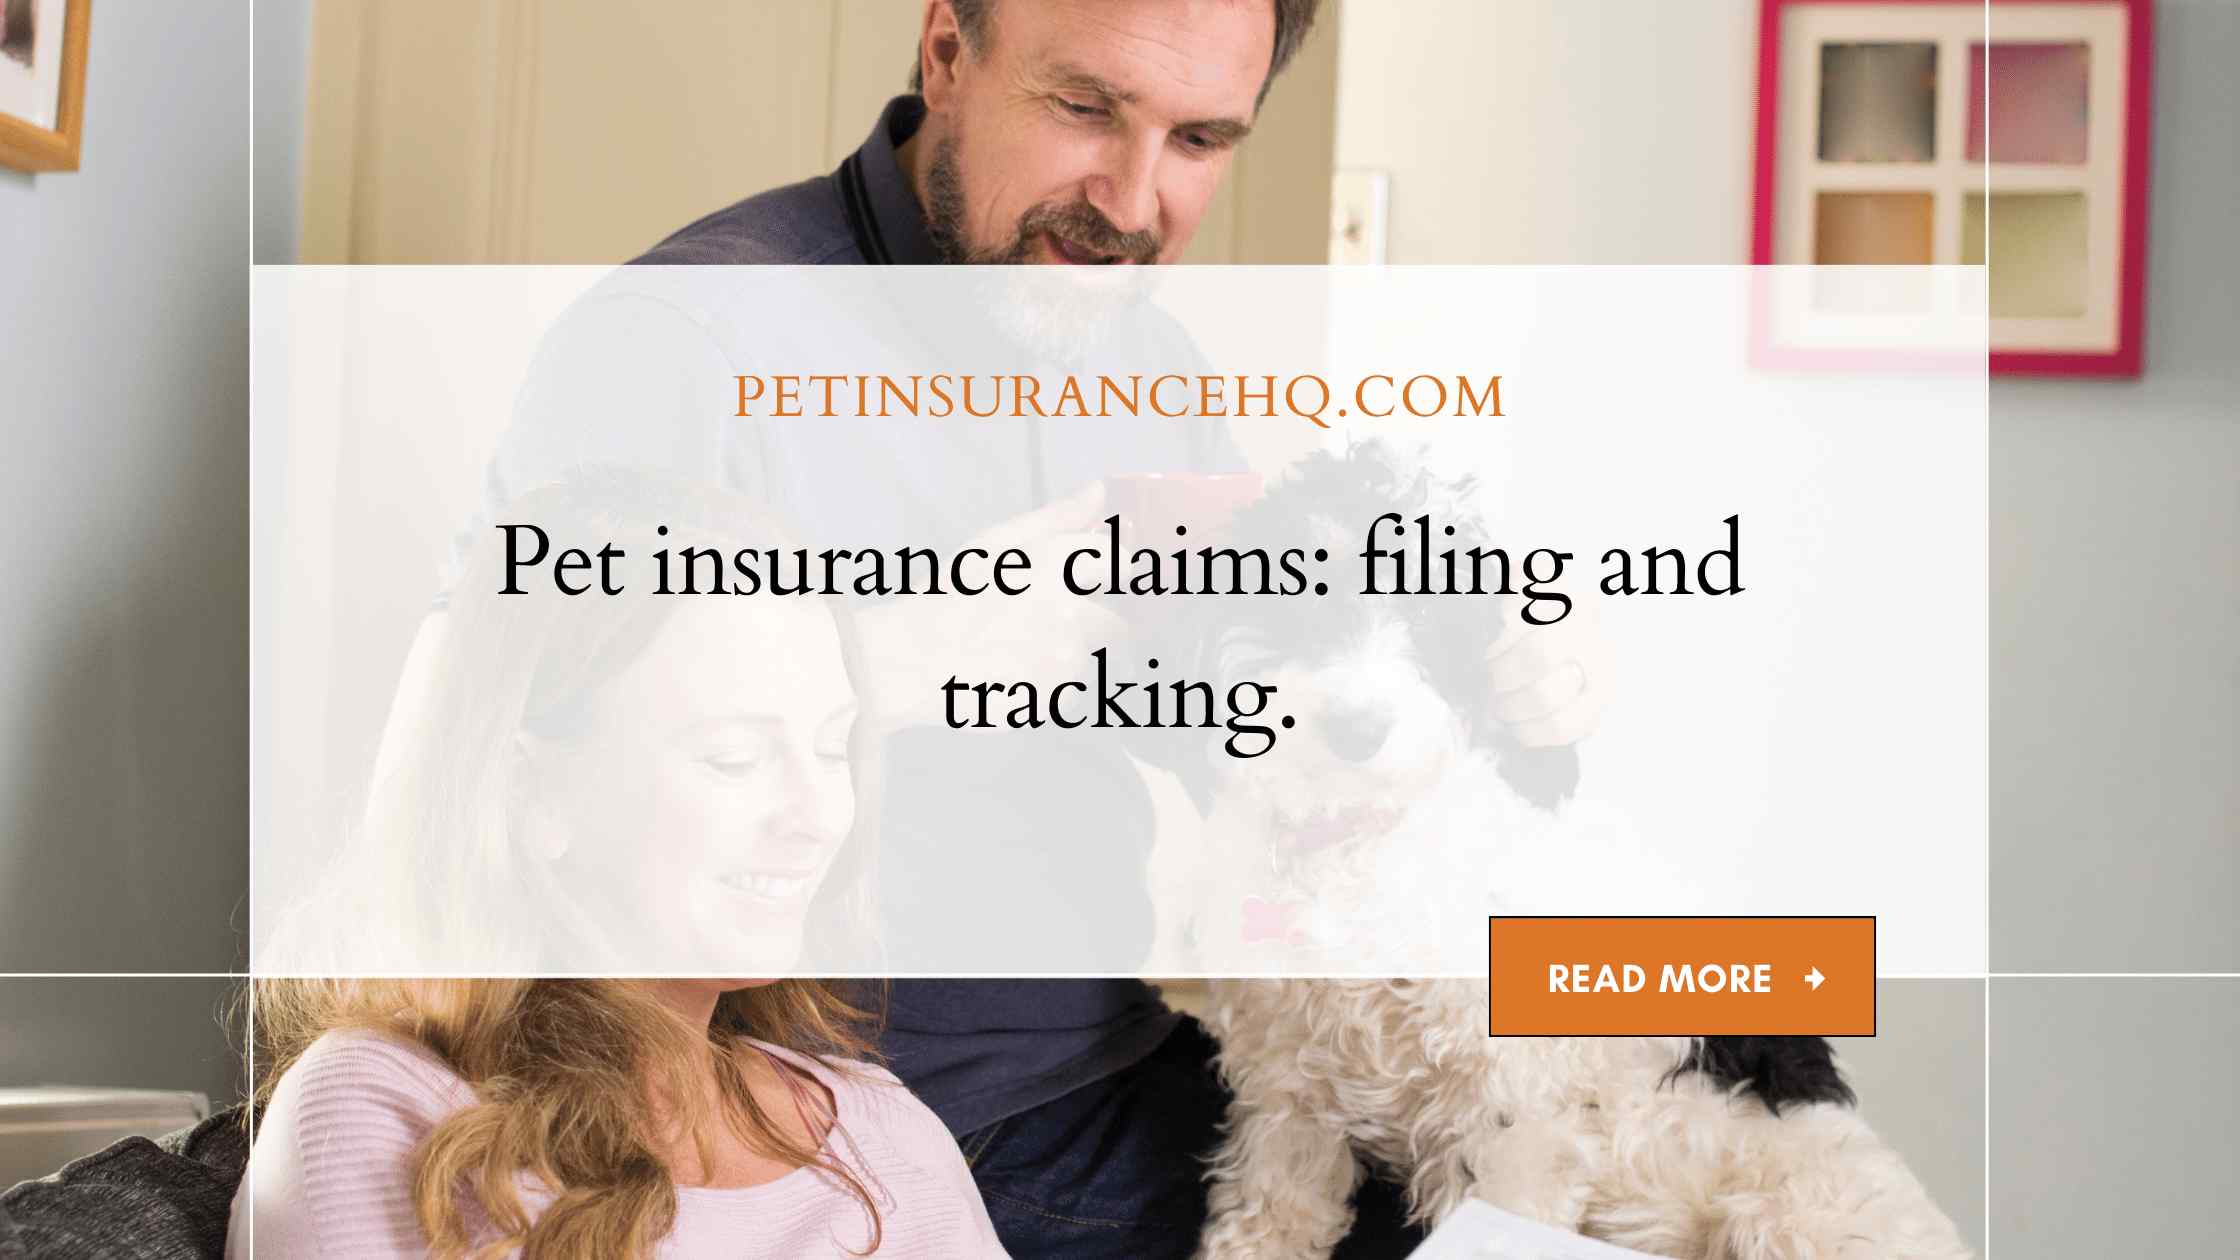 The Claims Process: Filing and Tracking Your Pet Insurance Claims